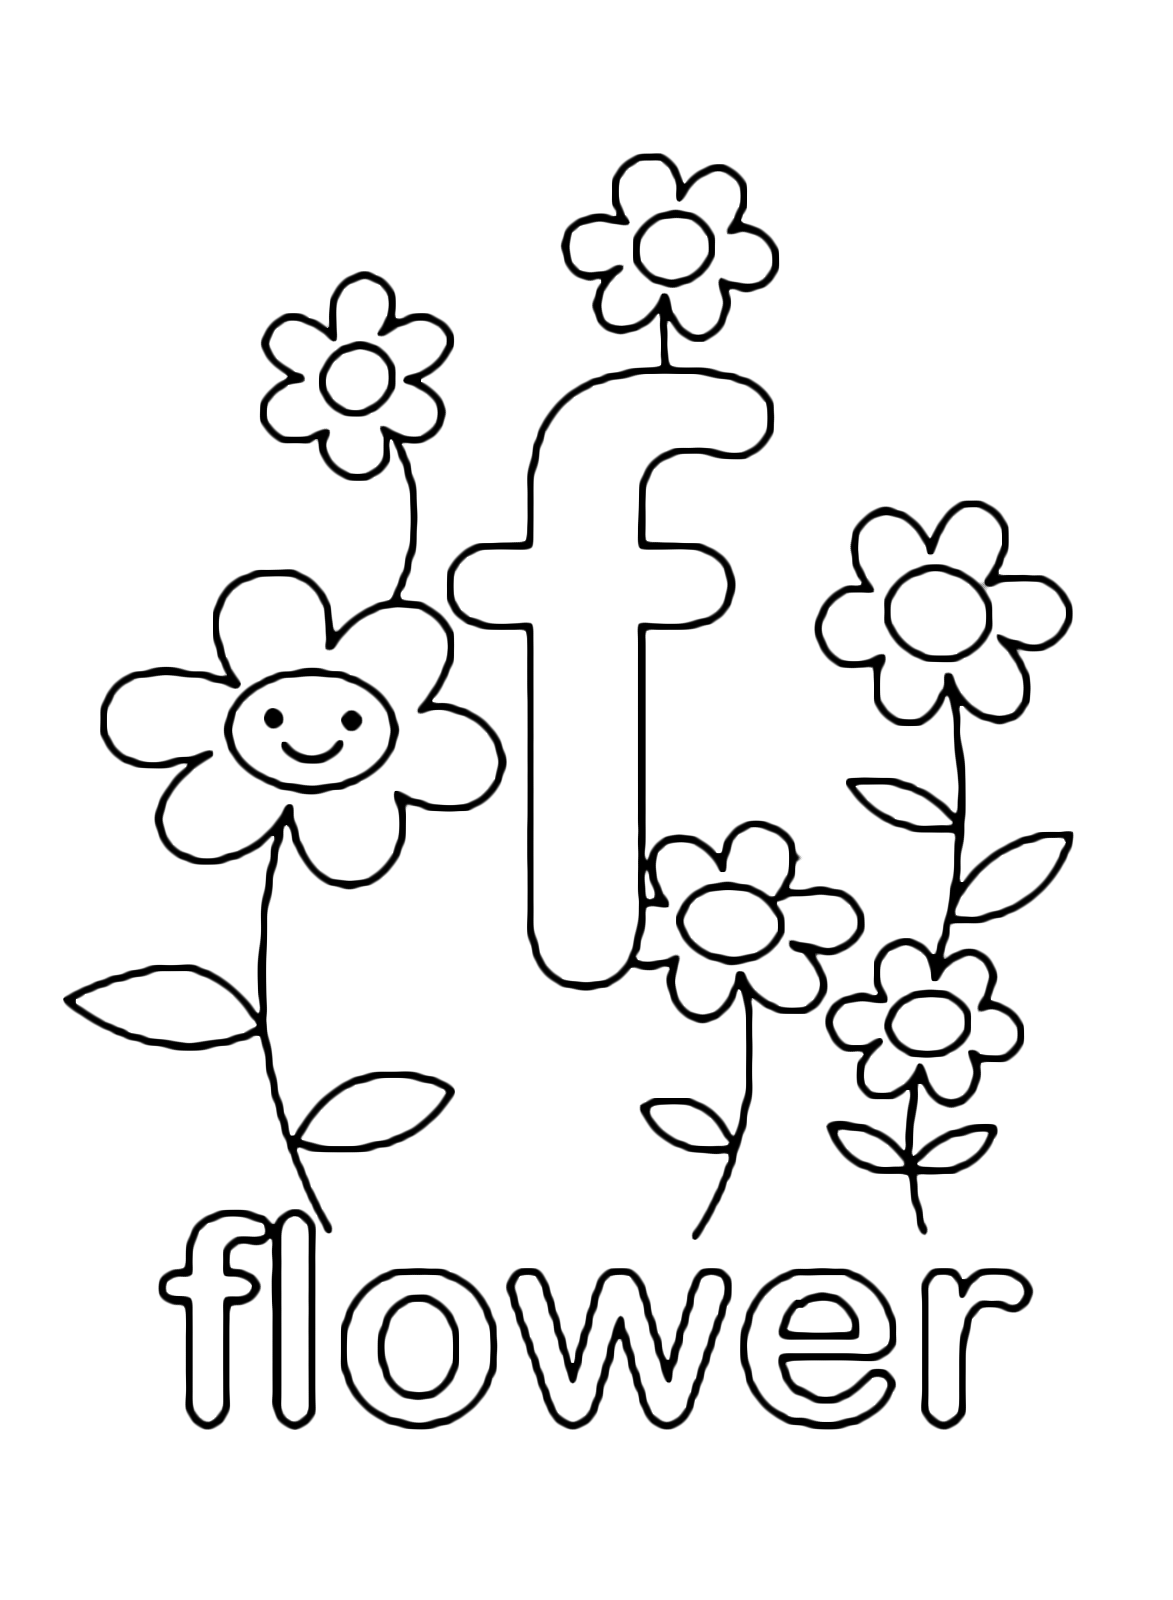 Letters and numbers - f for flower lowercase letter